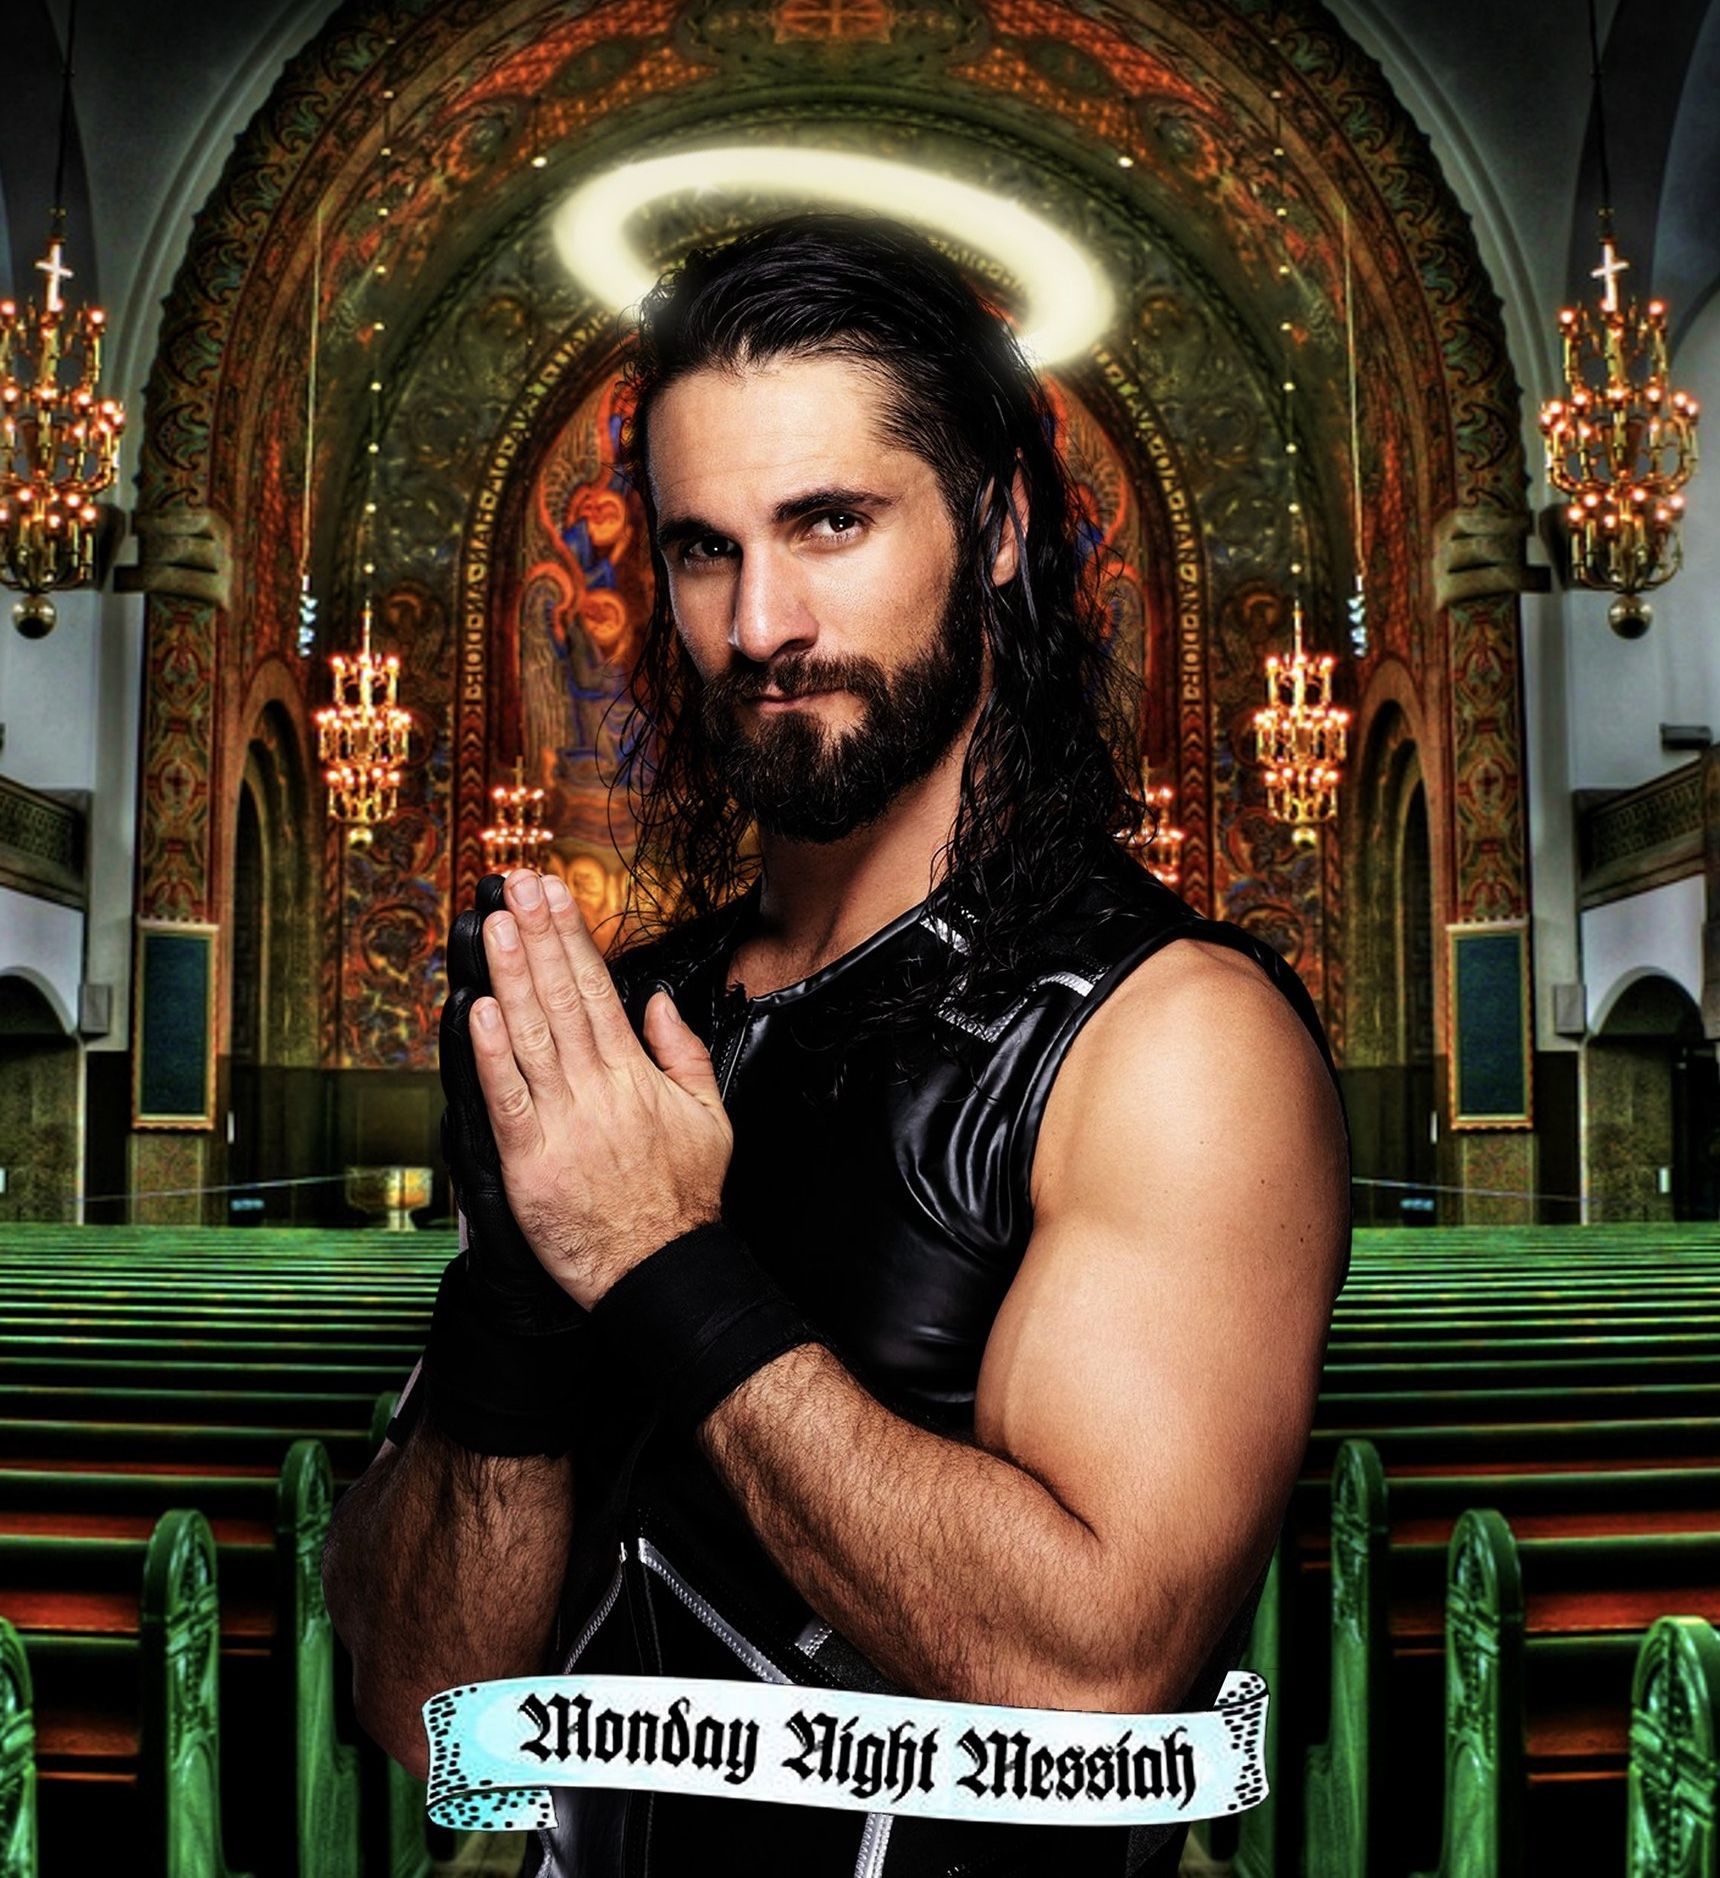 Seth Rollins proclaims he his Monday Night Messiah. Wwe seth rollins, Seth freakin rollins, Seth rollins